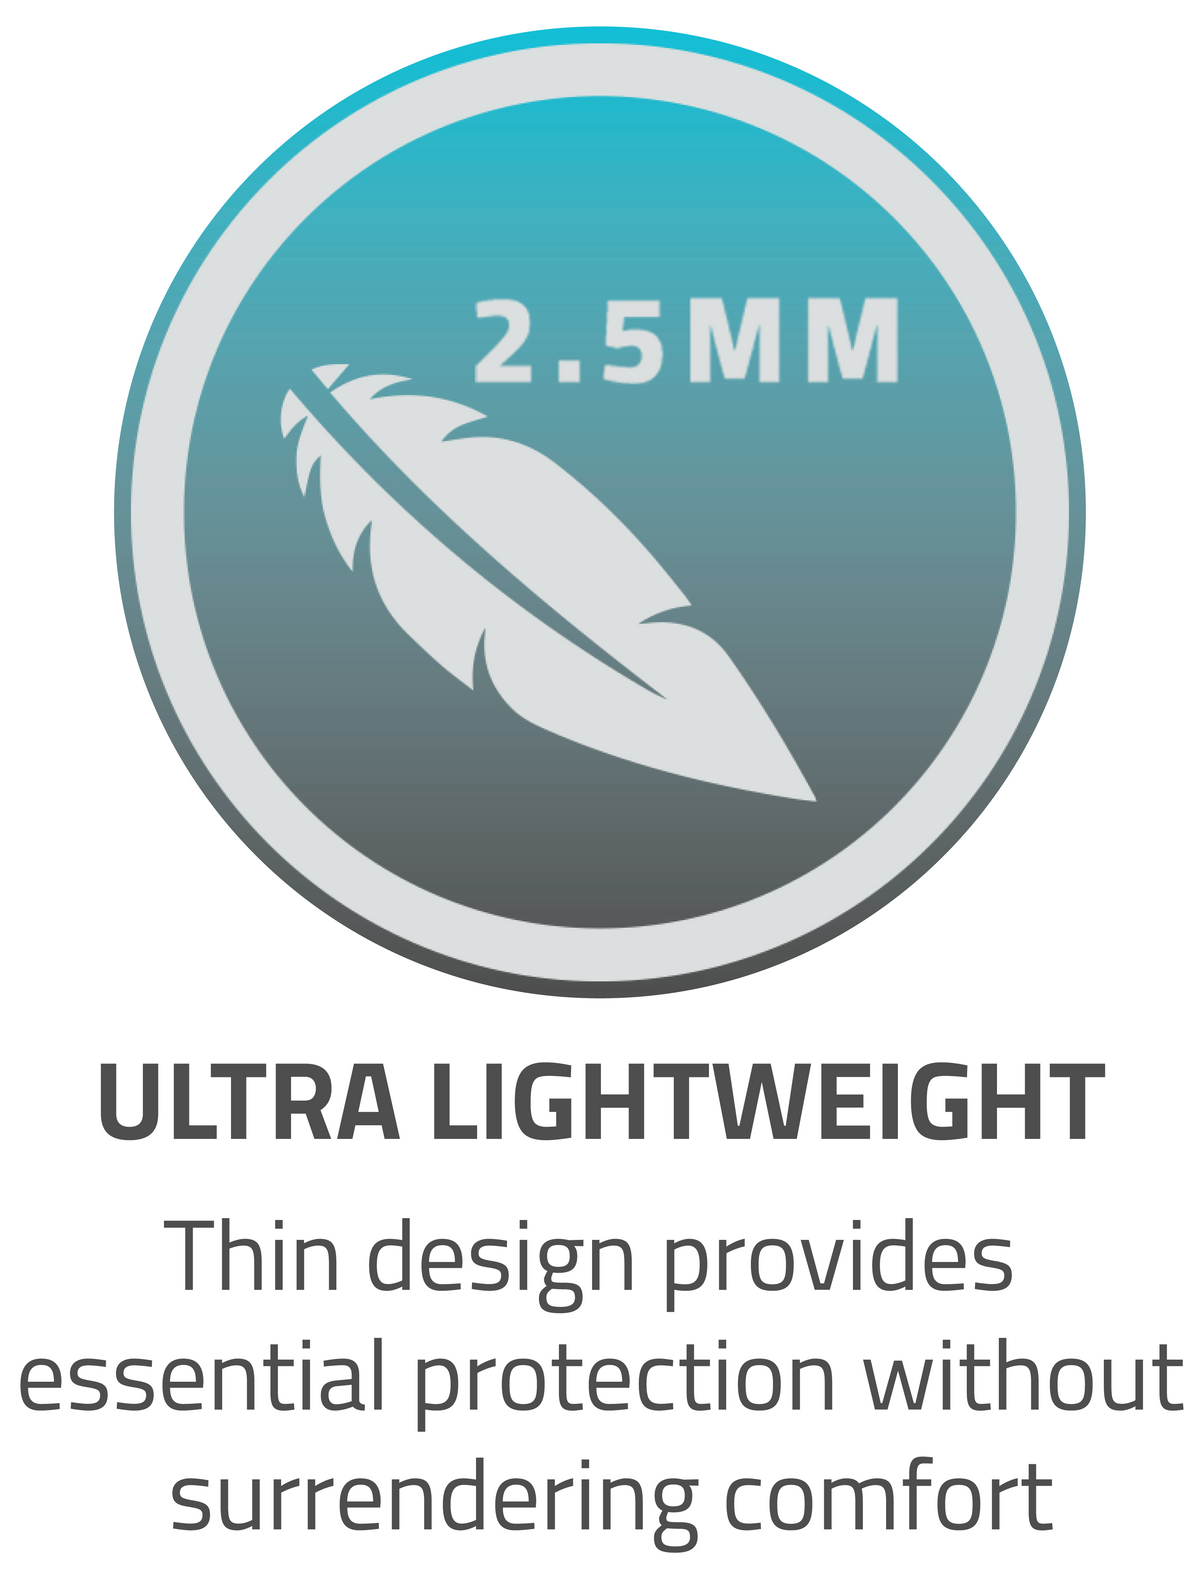 2.5MM ultra lightweight thin design provides essential protection without surrendering comfort